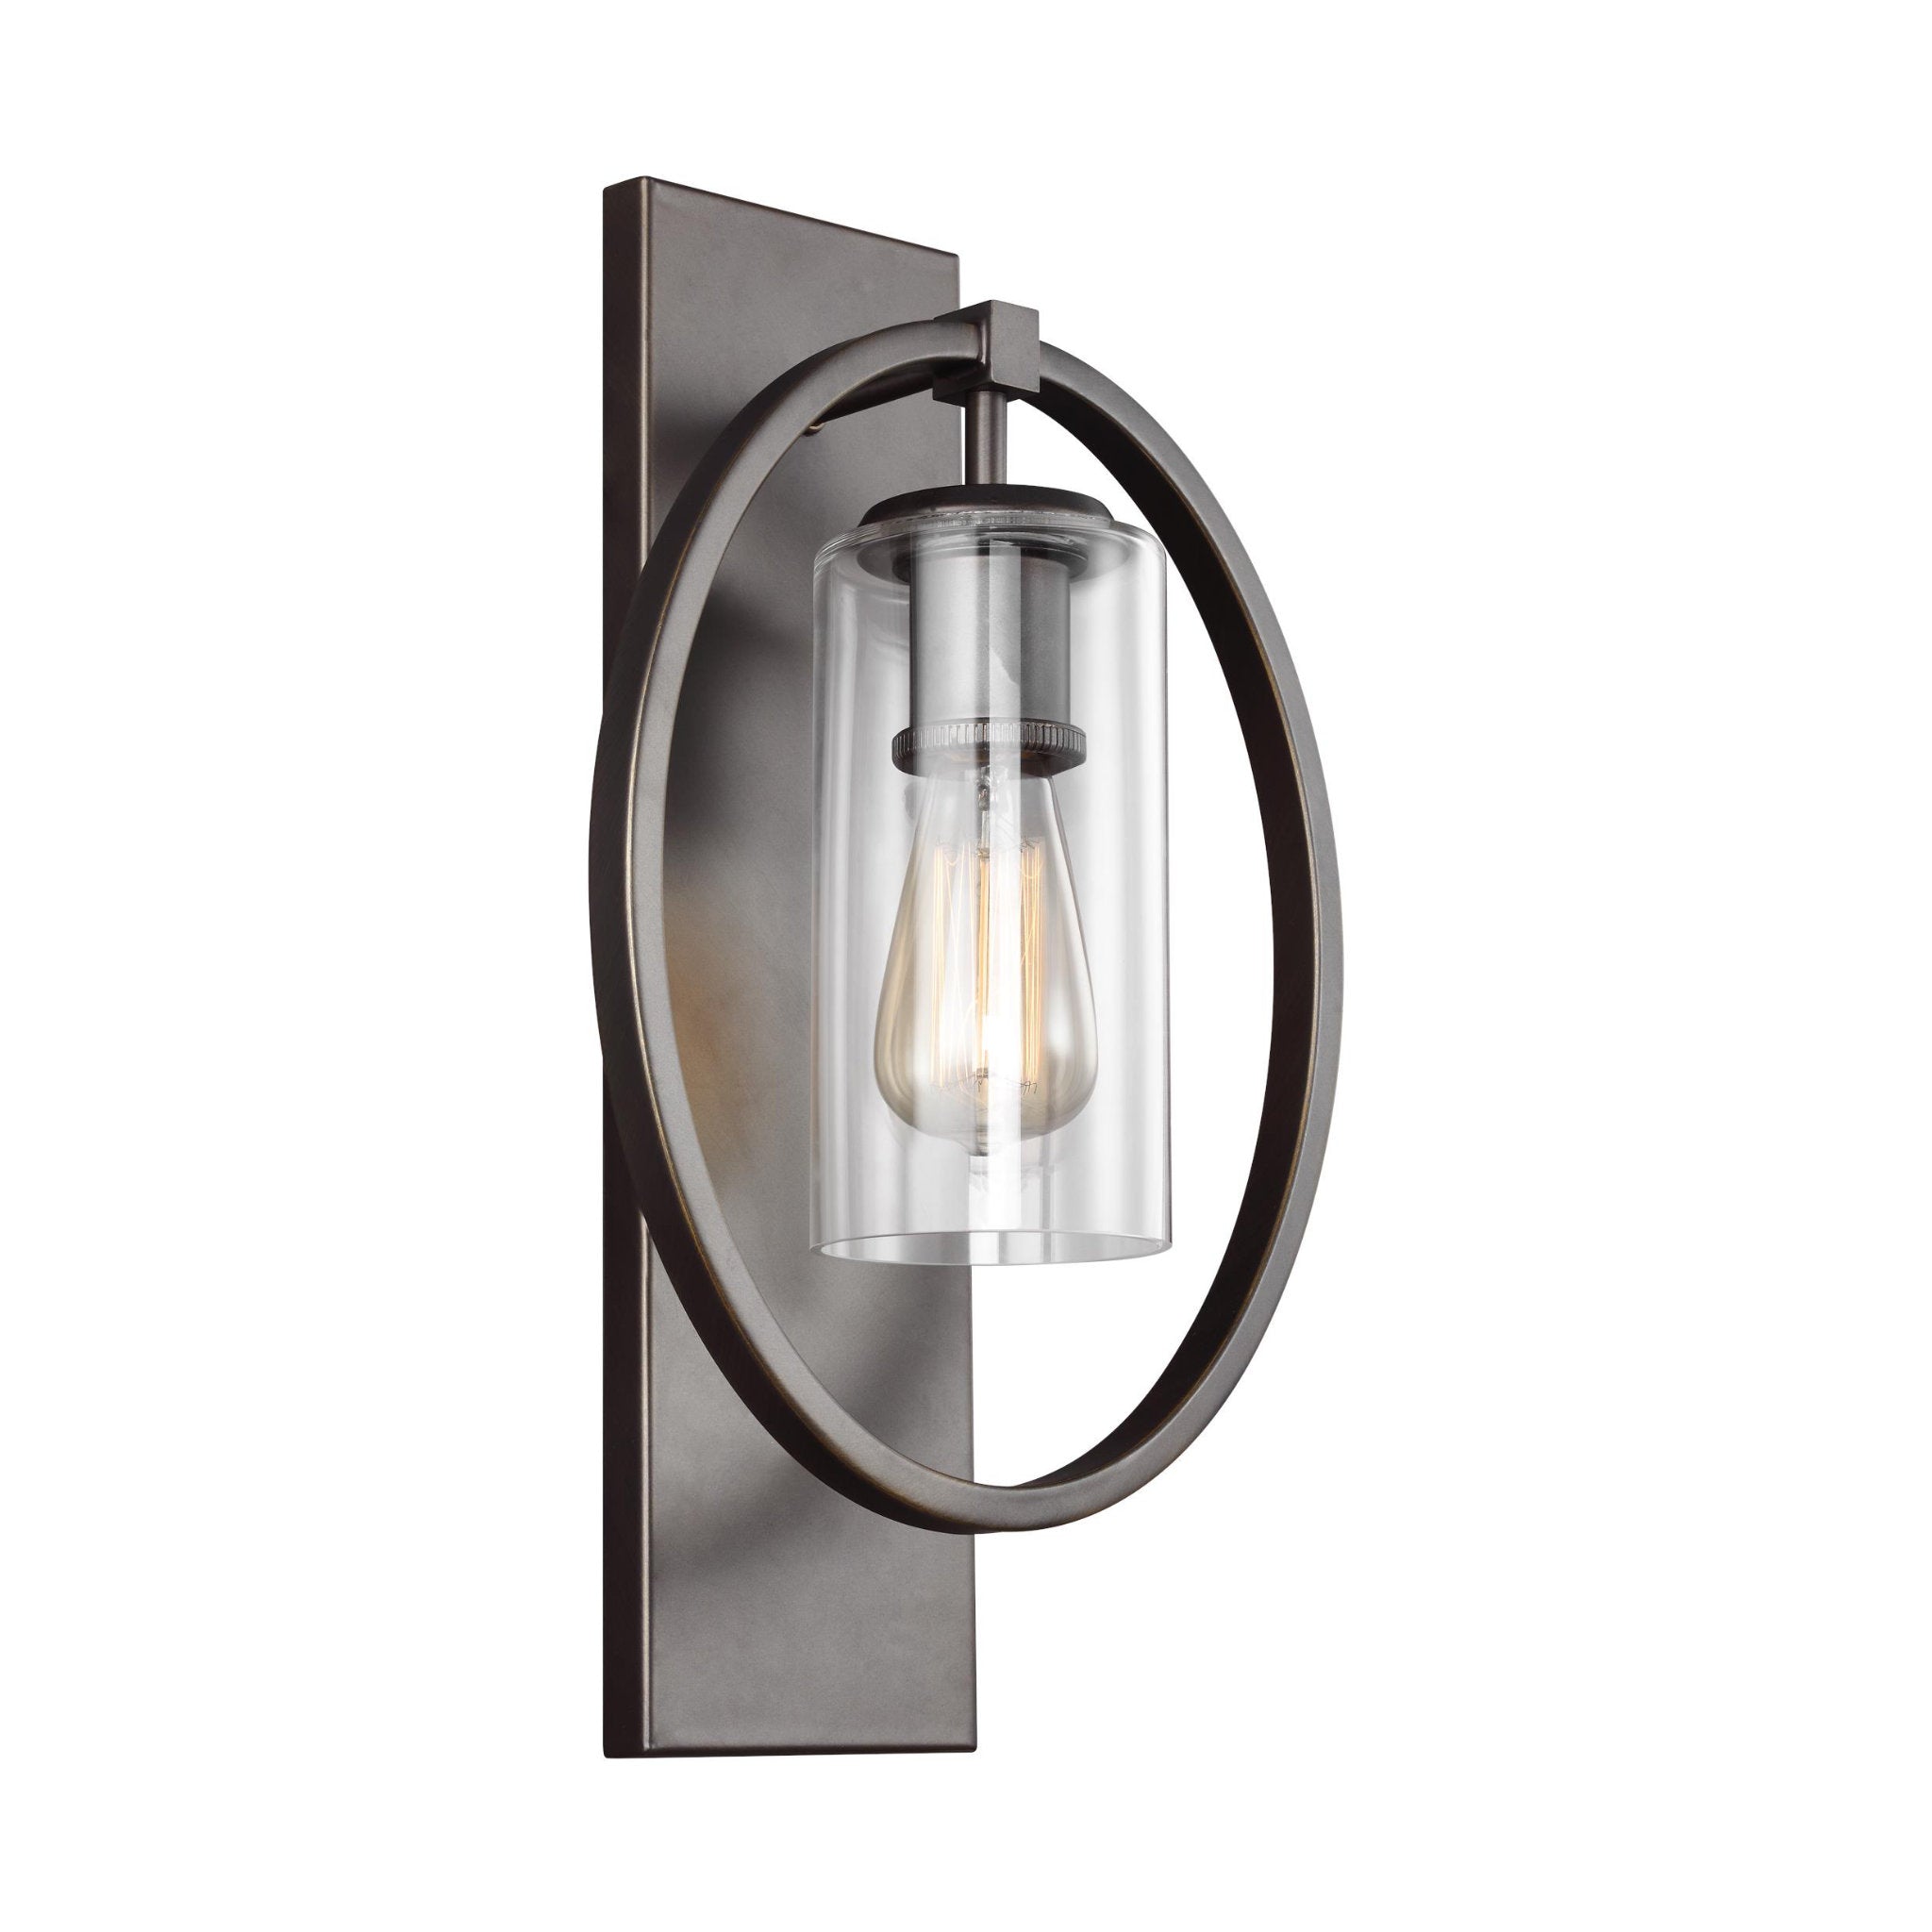 Marlena Large Sconce Transitional Wall Bath Fixture 10.5" Width 18" Height Steel Round Clear Shade in Antique Bronze